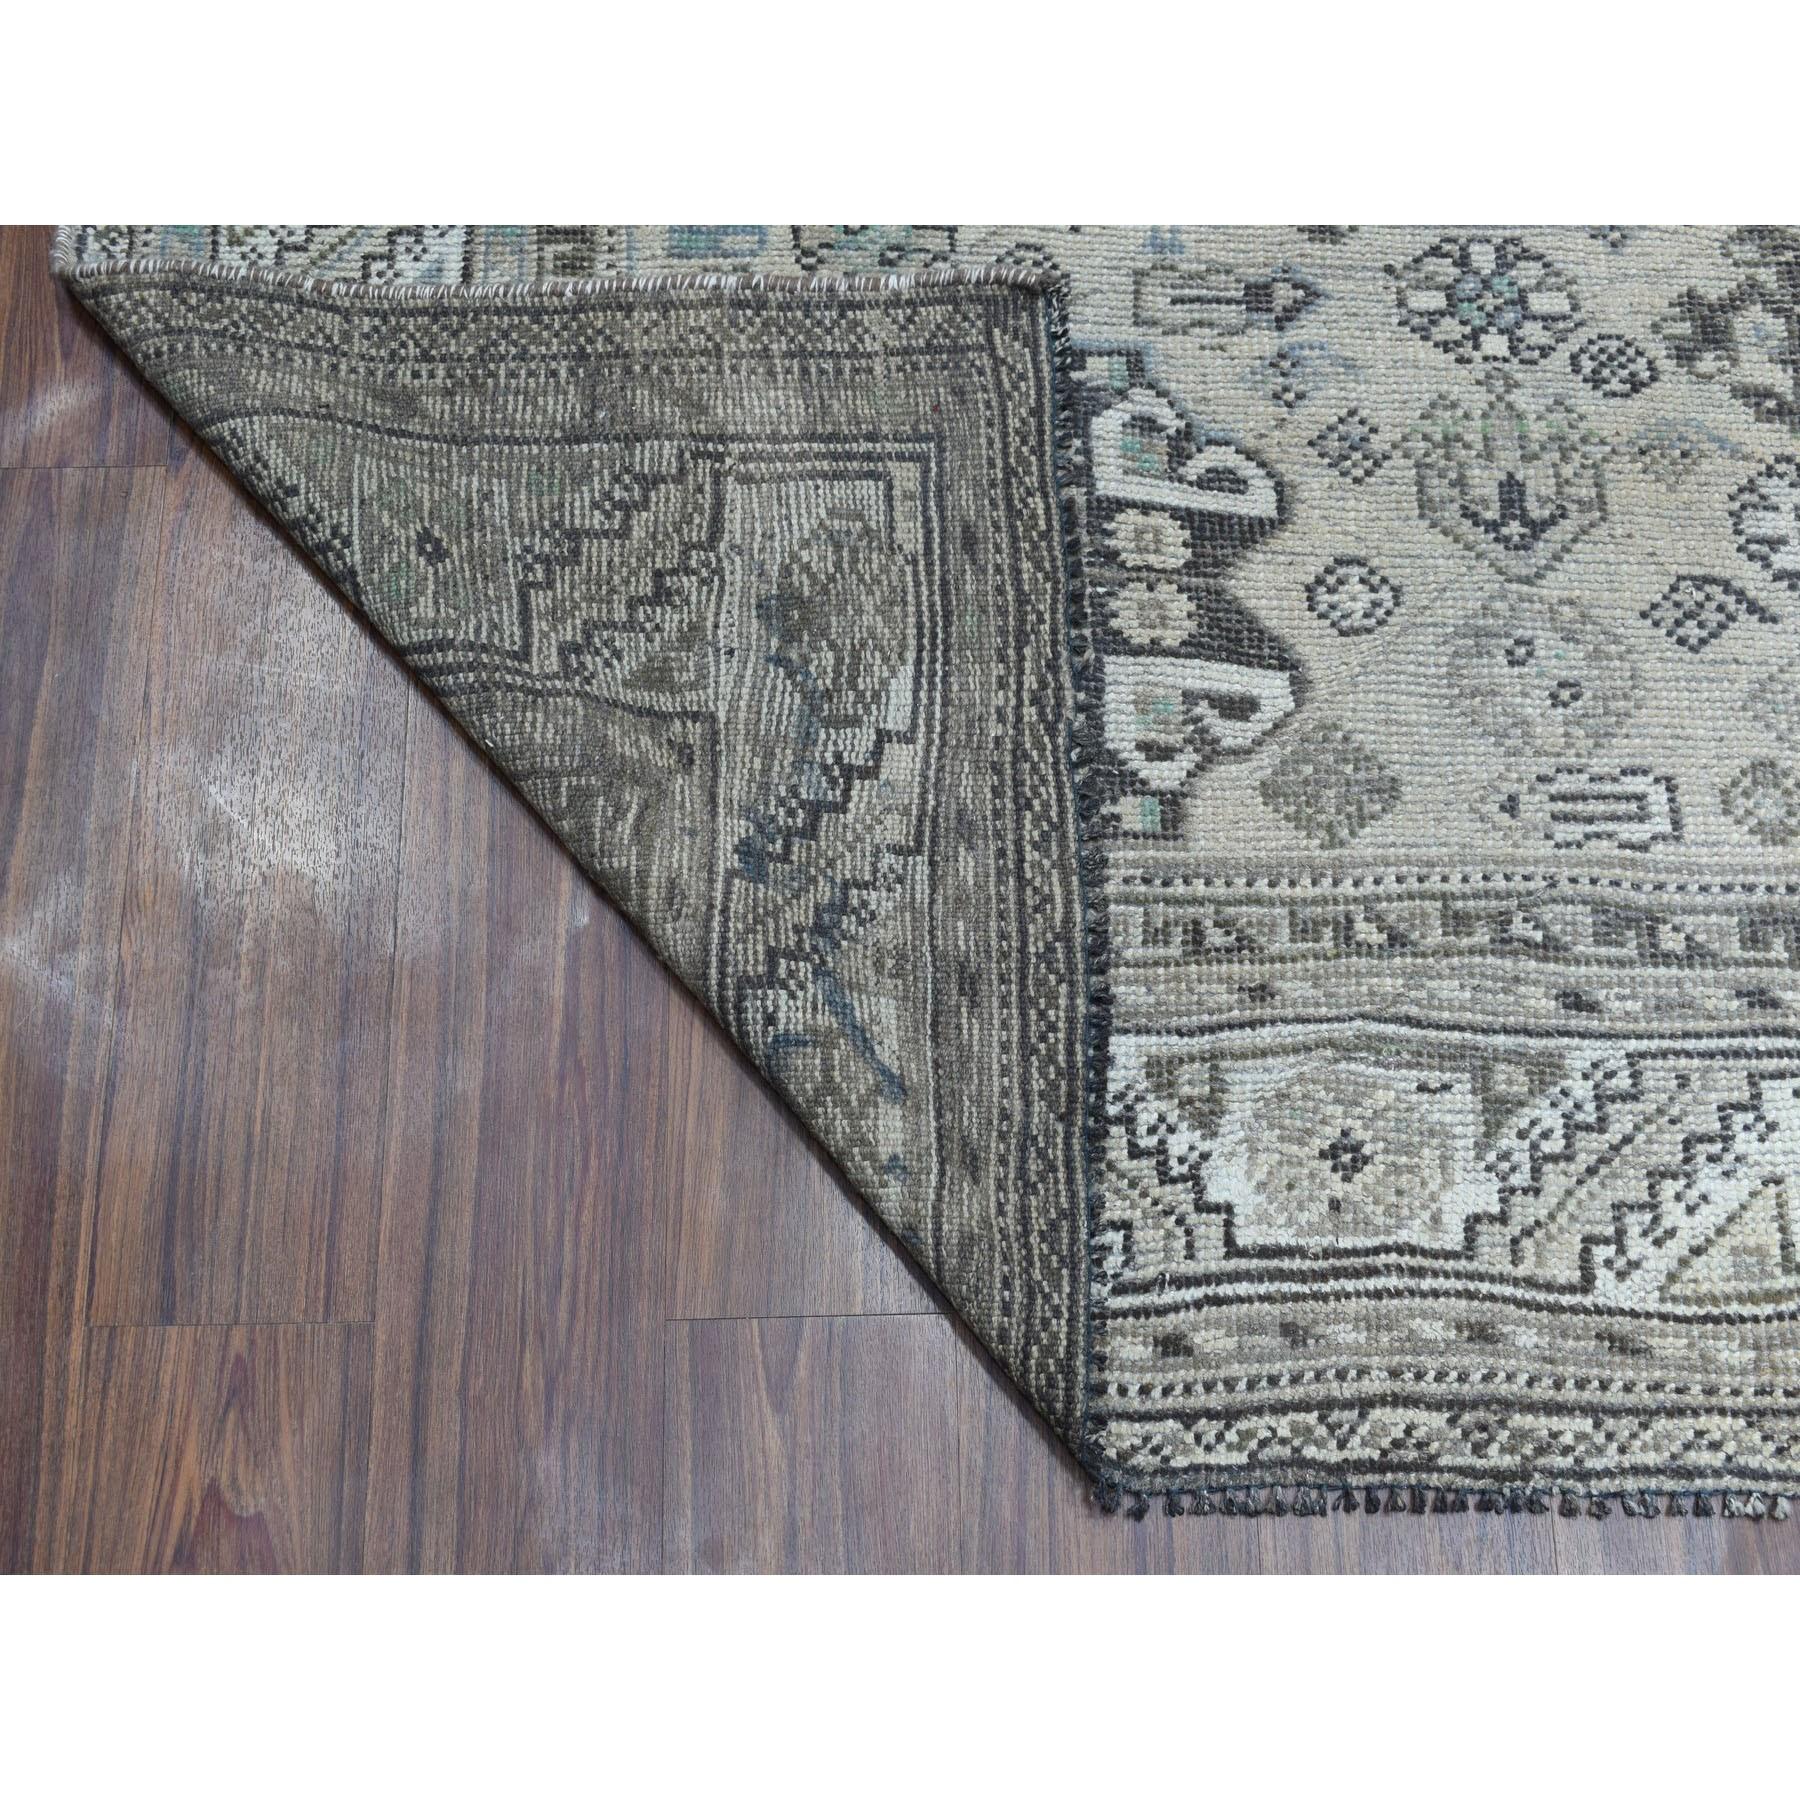 Medieval Vintage Worn Down Distressed Colors Persian Qashqai Hand Knotted Bohemian Rug